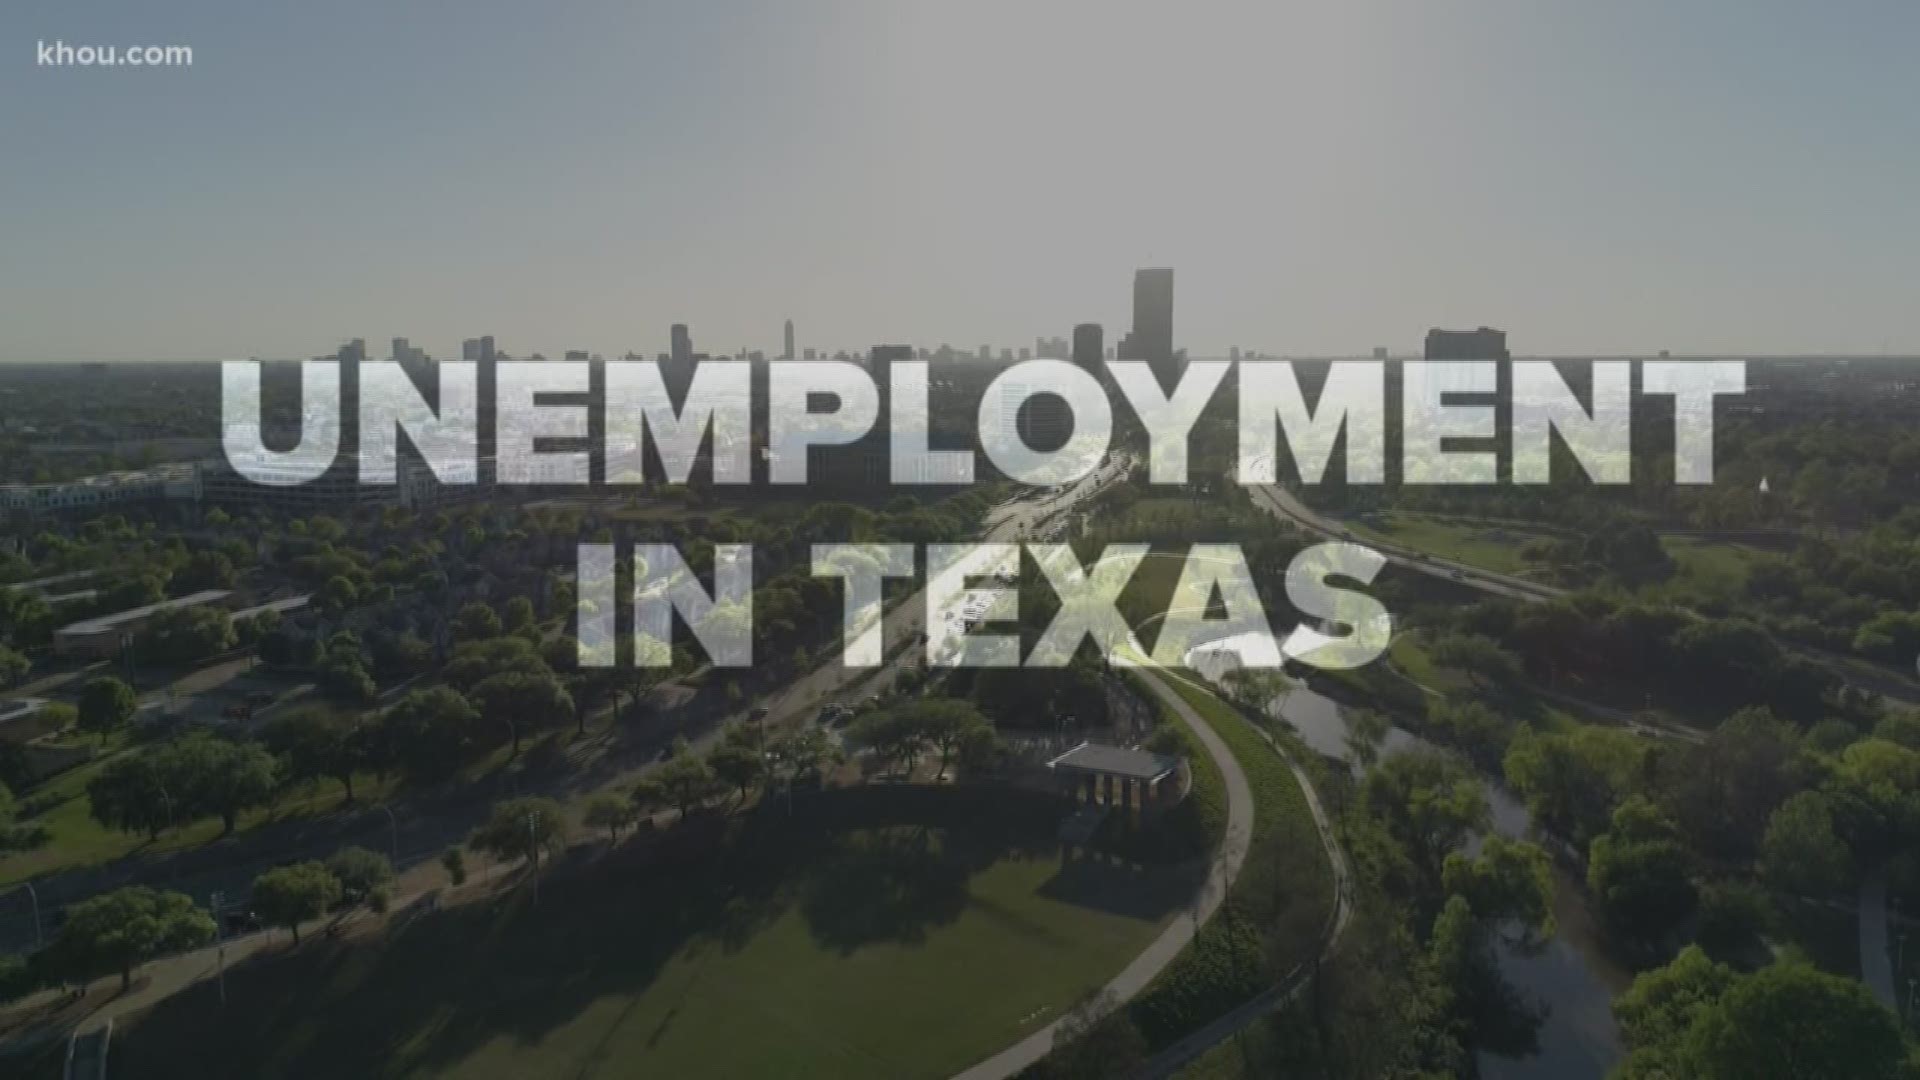 Can You Extend Your Unemployment Benefits In Texas